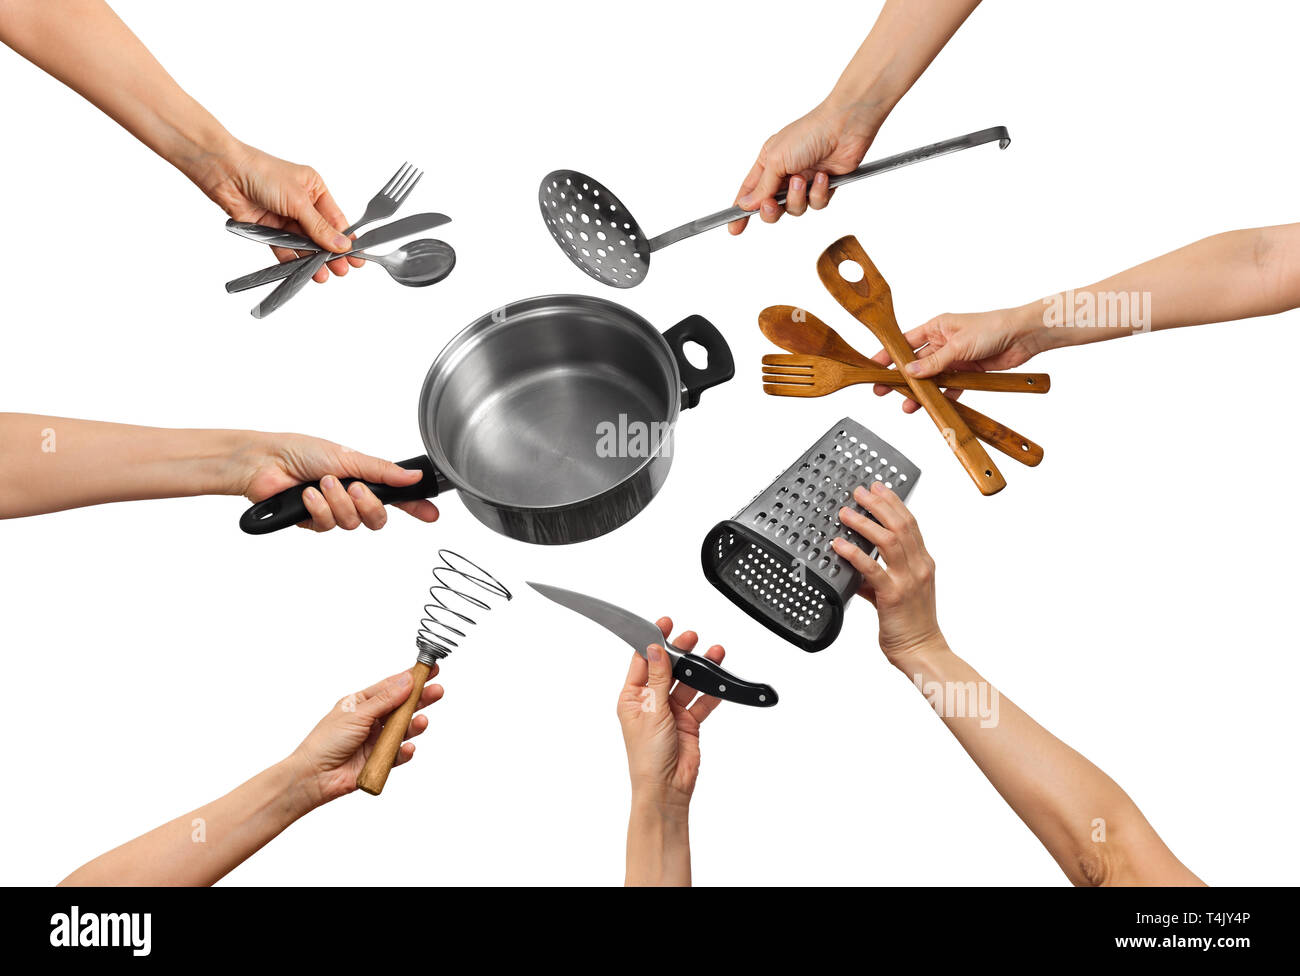 Professional Cooking Tools Set for a Modern Kitchen in a Brown Wooden  Stylish Box. Stock Image - Image of chef, creativity: 181619825